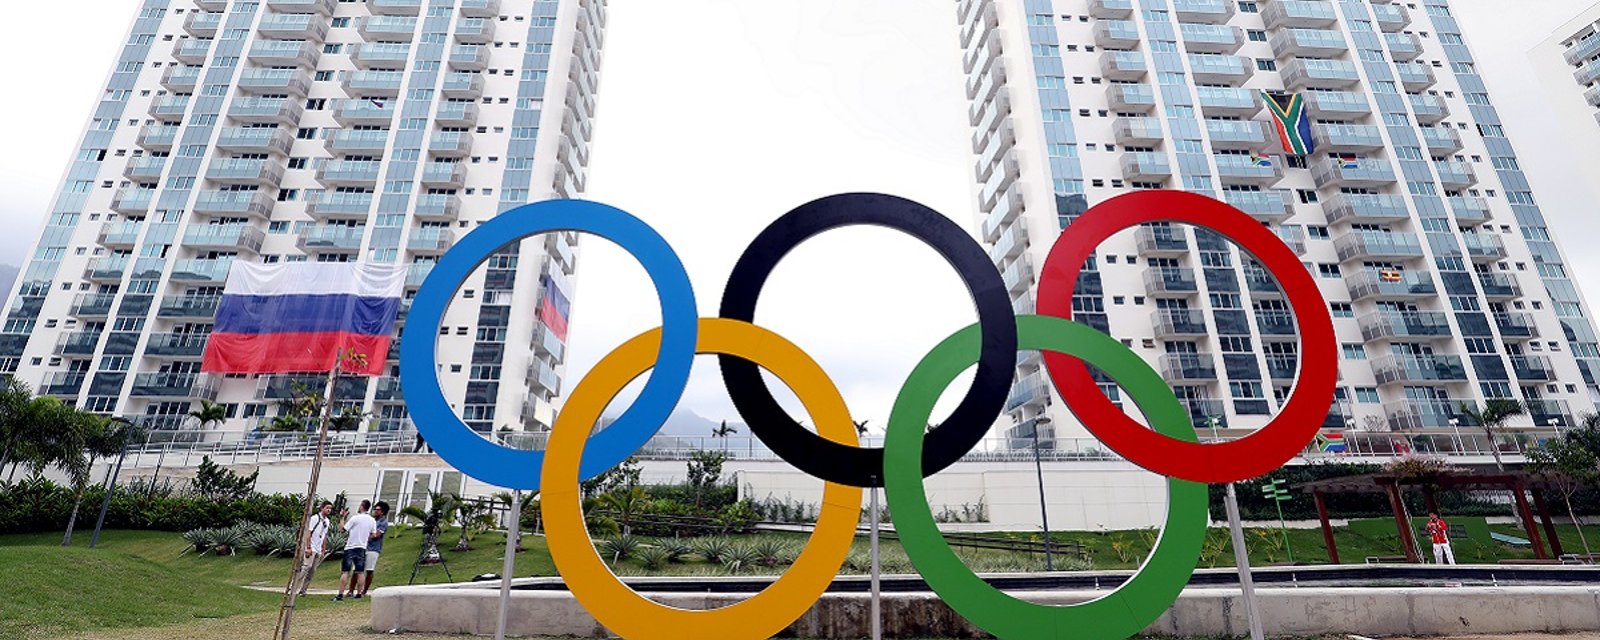 Breaking: Reviled NHL owner says he won't let his star player go to the Olympics.